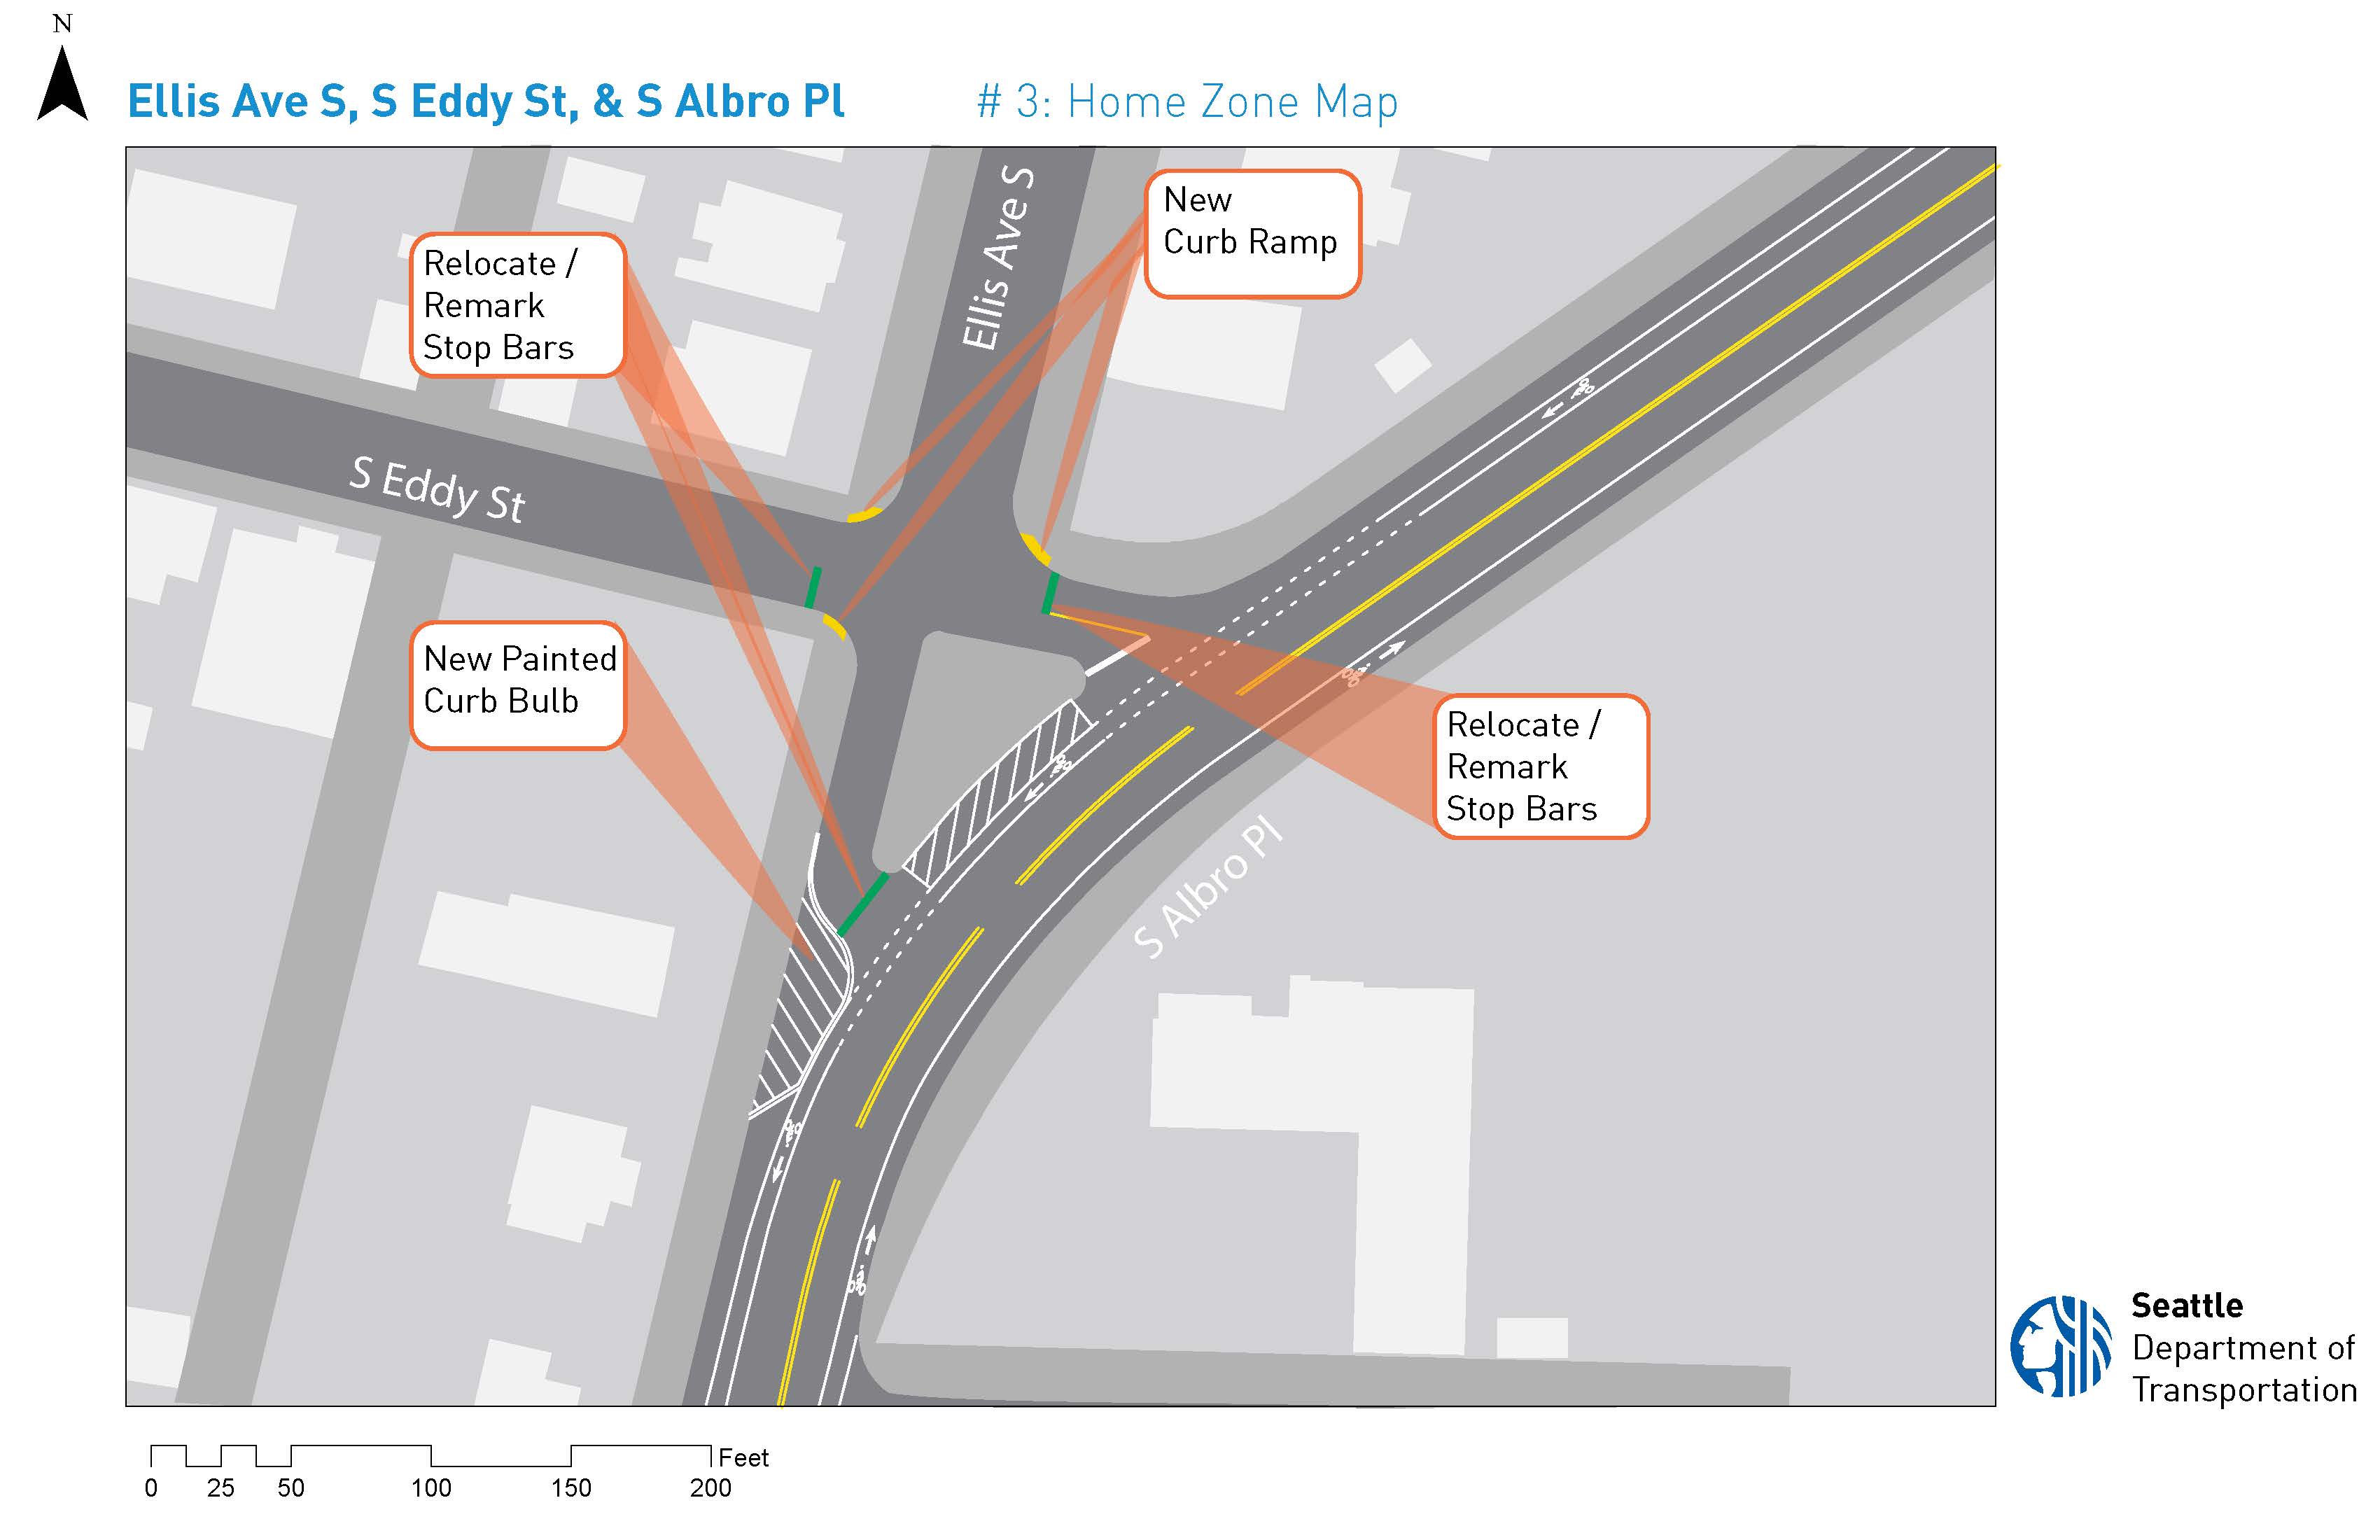 Map of Ellis Ave S, S Eddy St, and S Albro Pl Home Zone